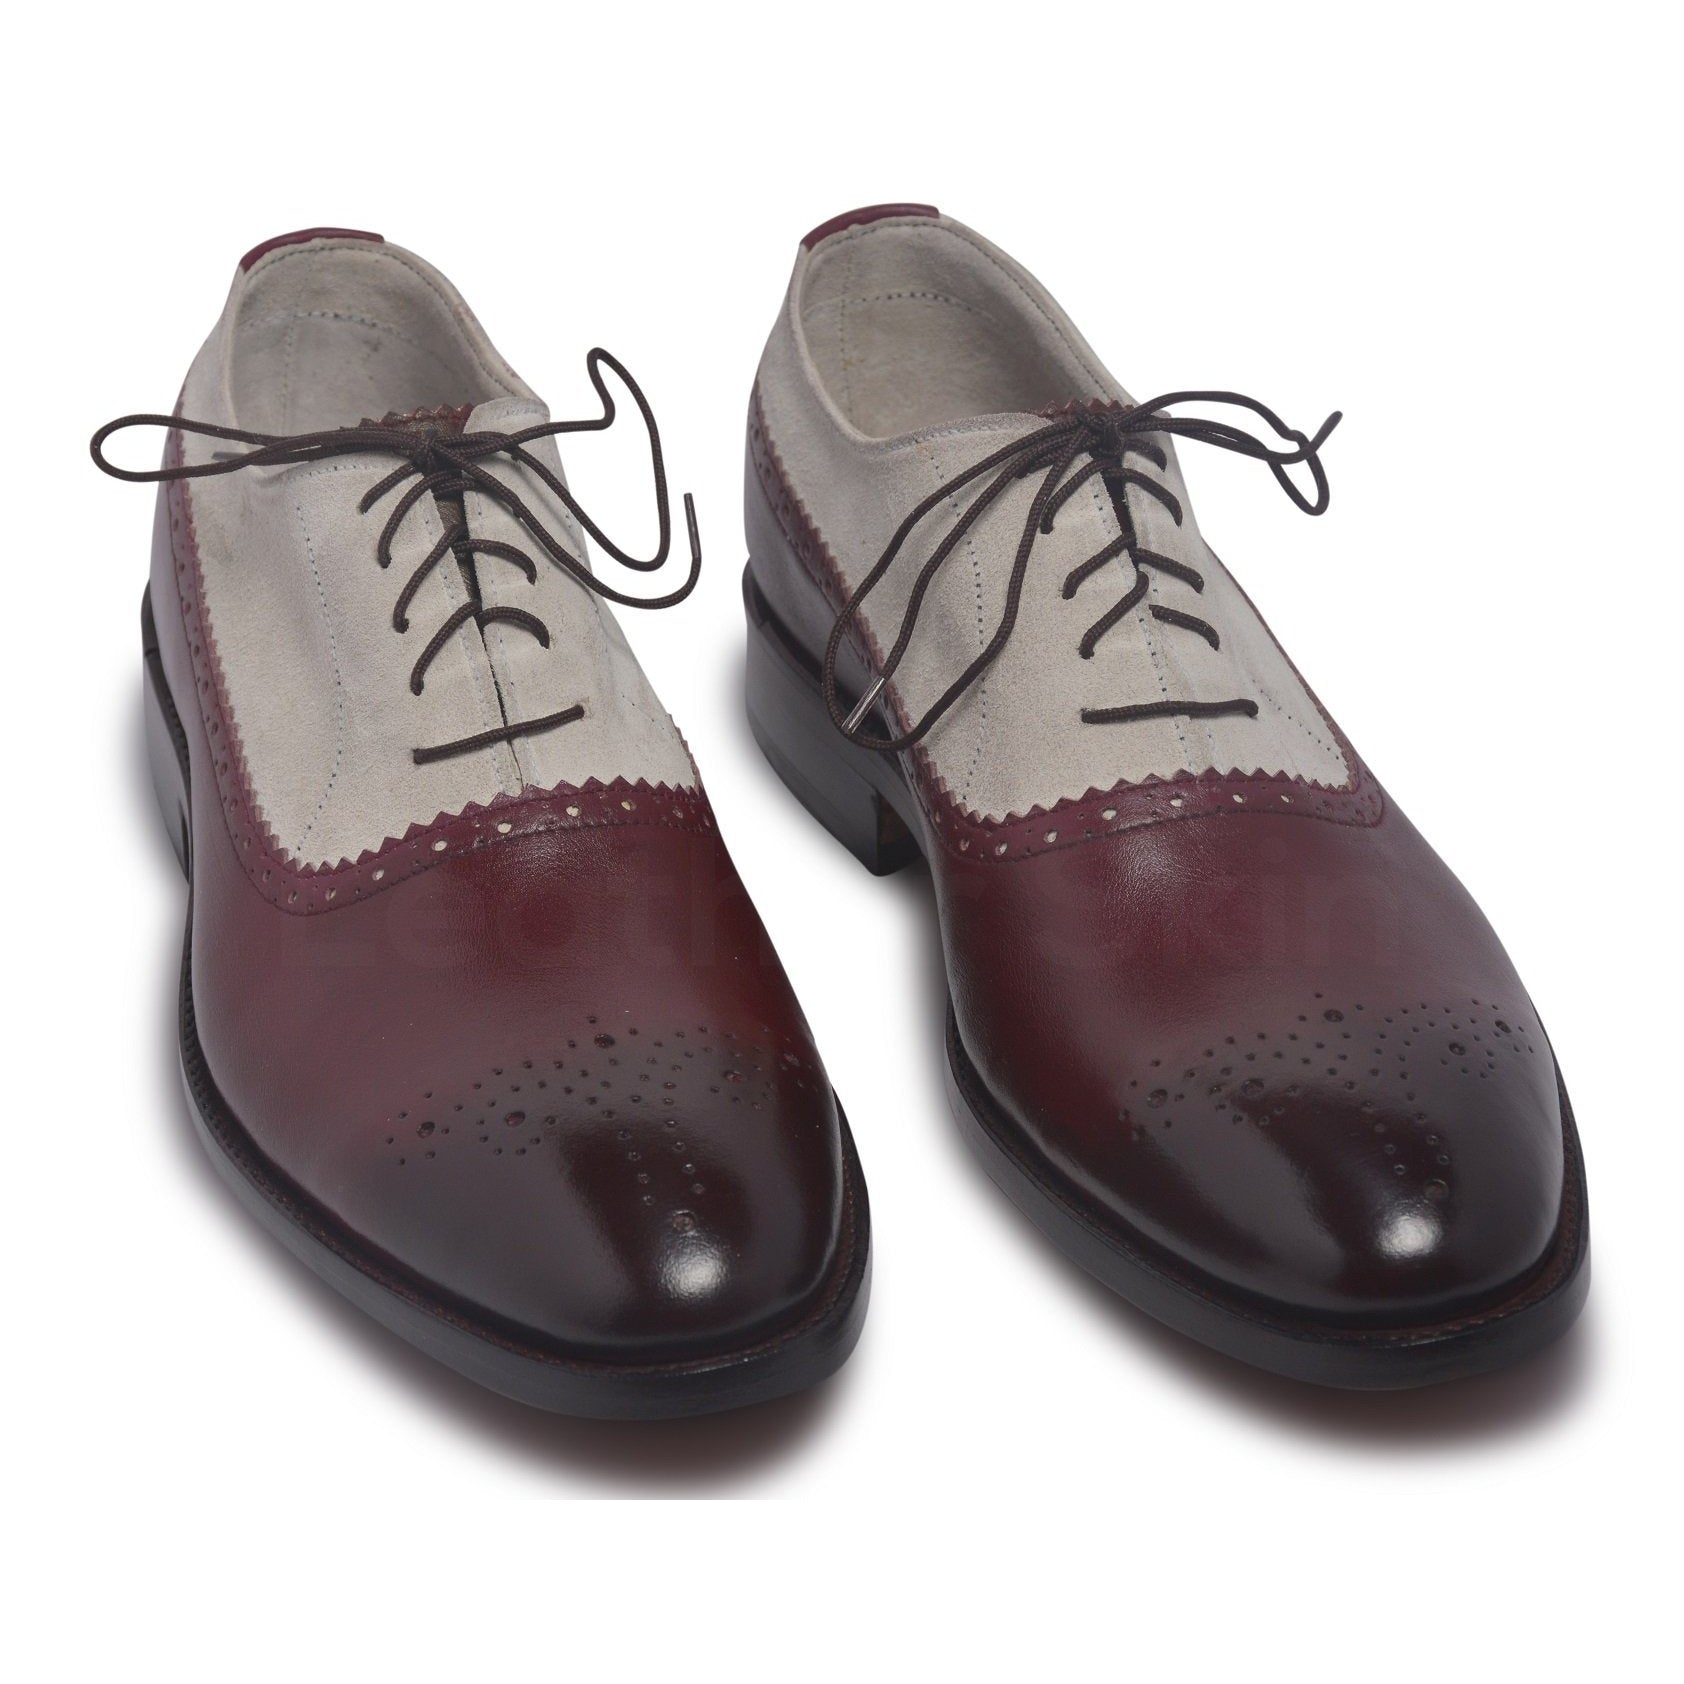 Men Two Tone Red Oxford Glossy Genuine Leather Shoes - Leather Skin Shop